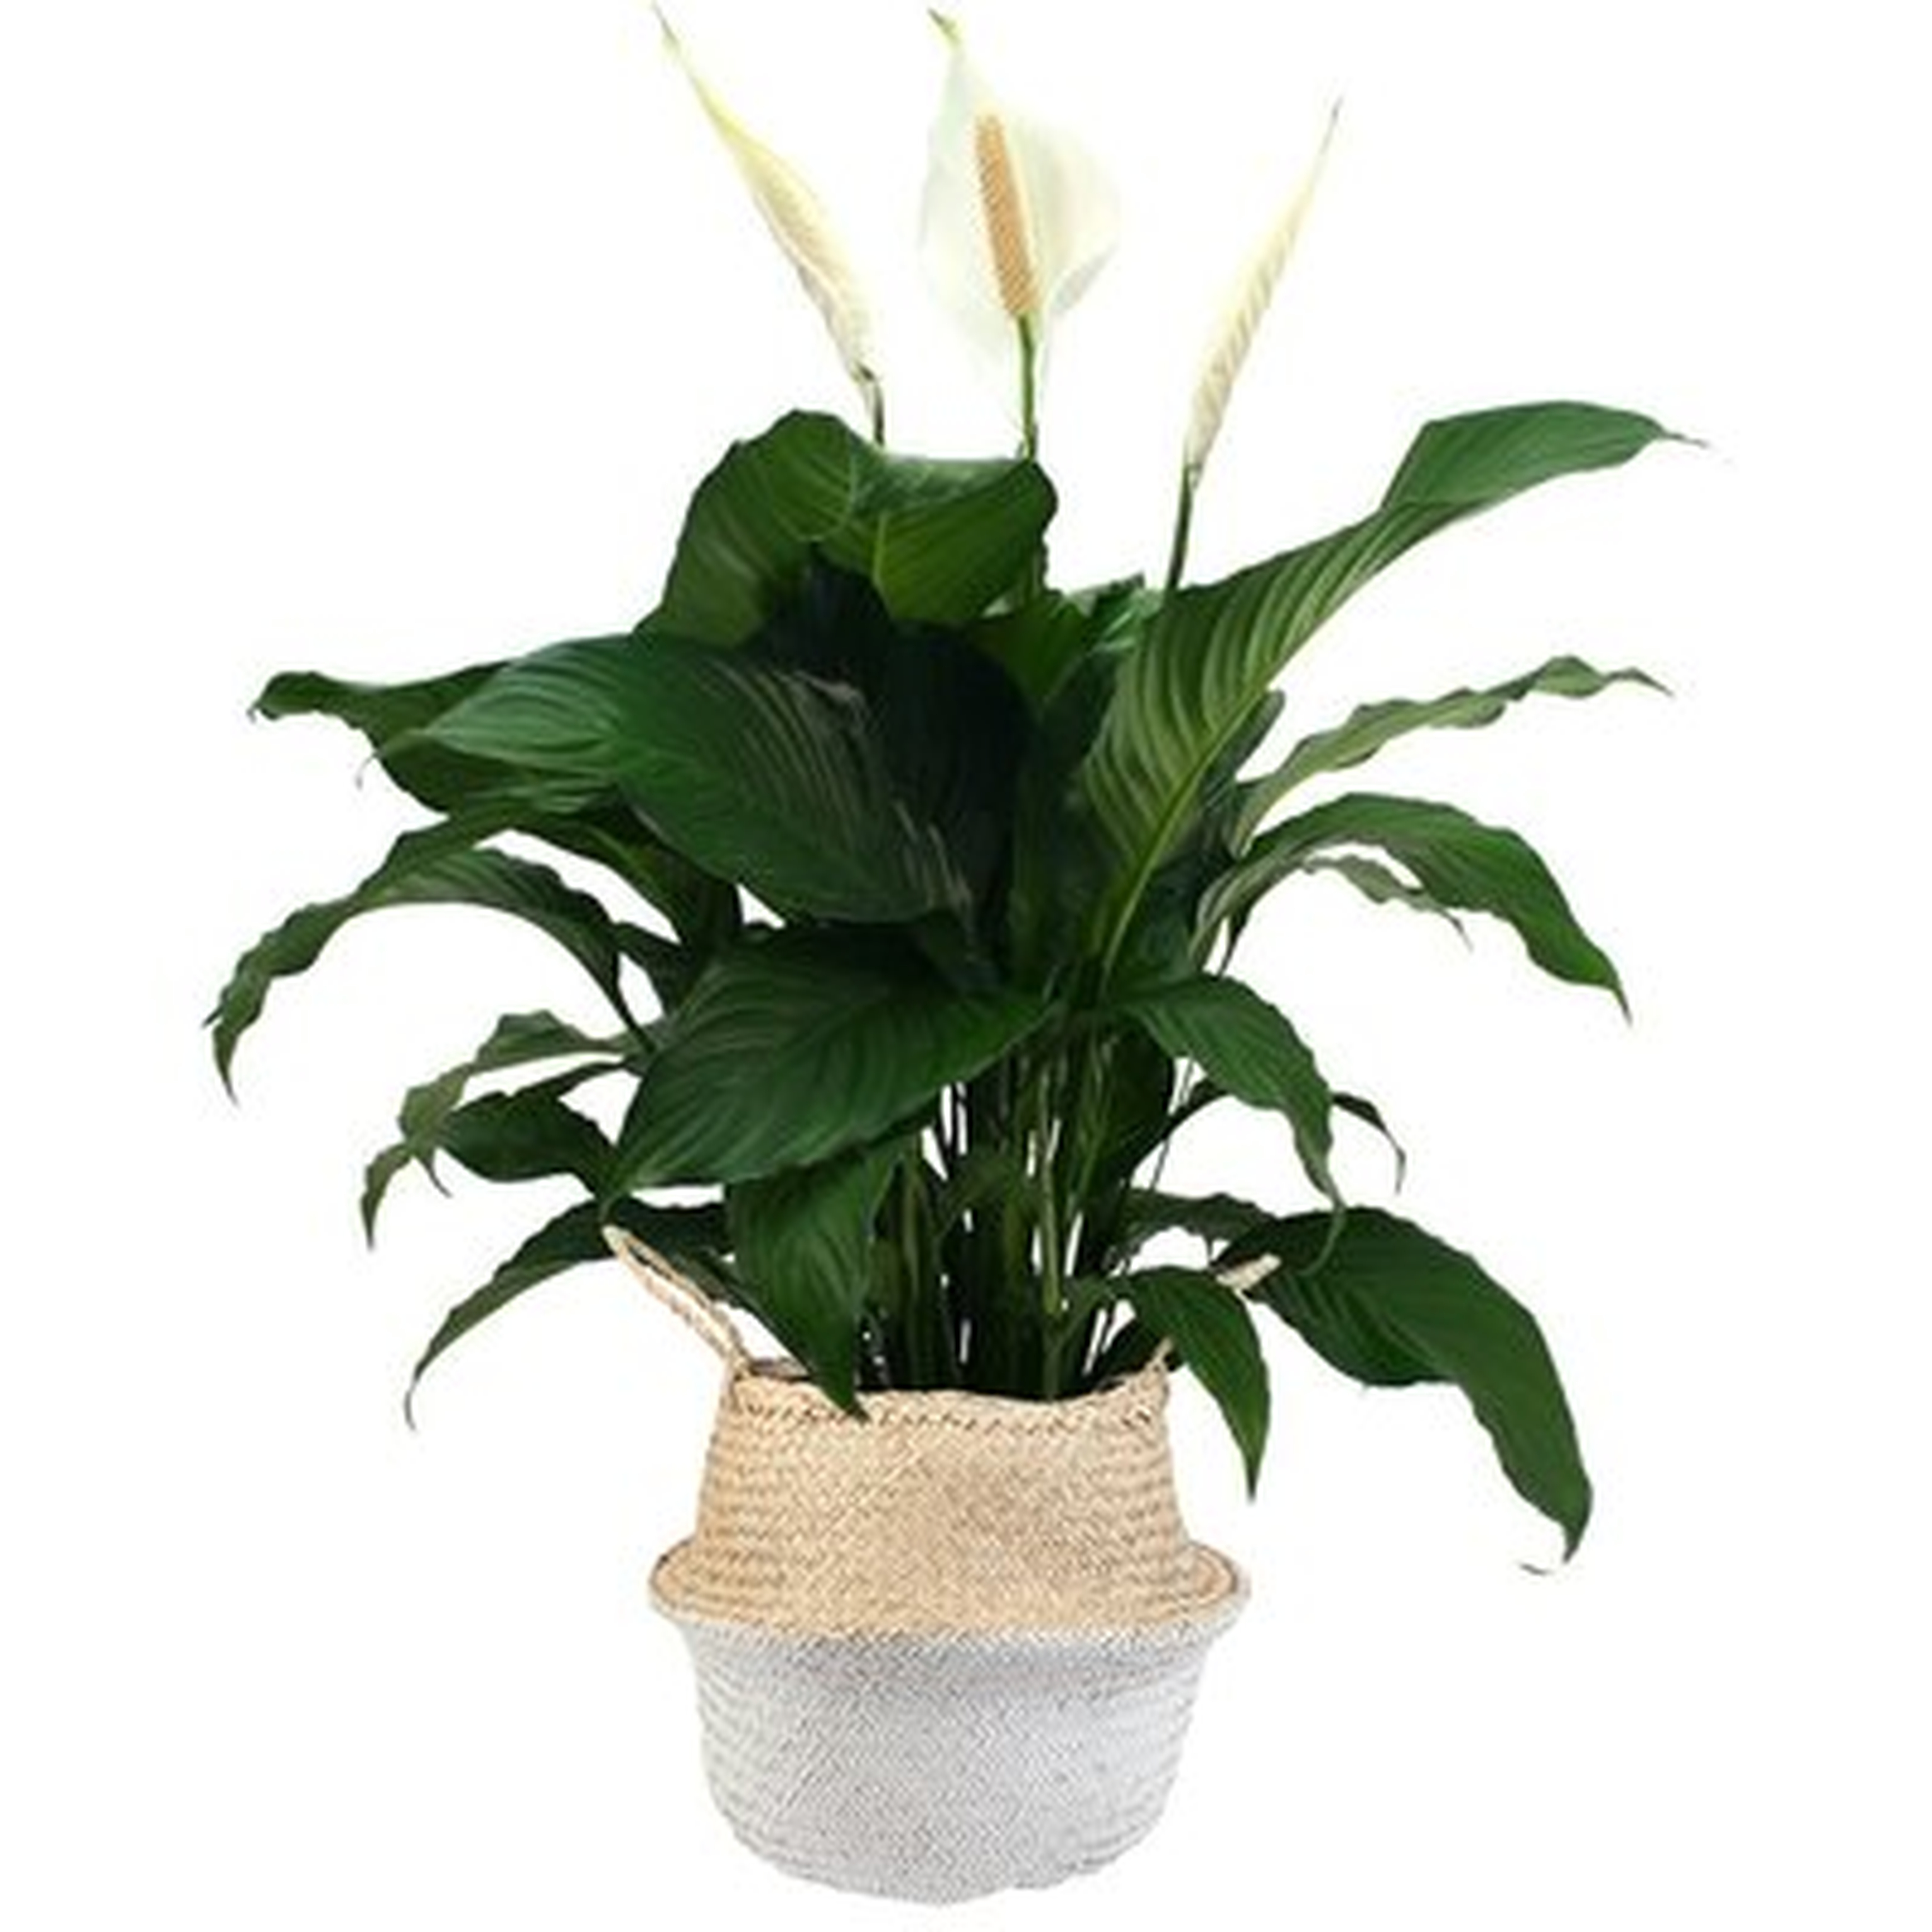 32" Live Peace Lily Plant in Basket - AllModern